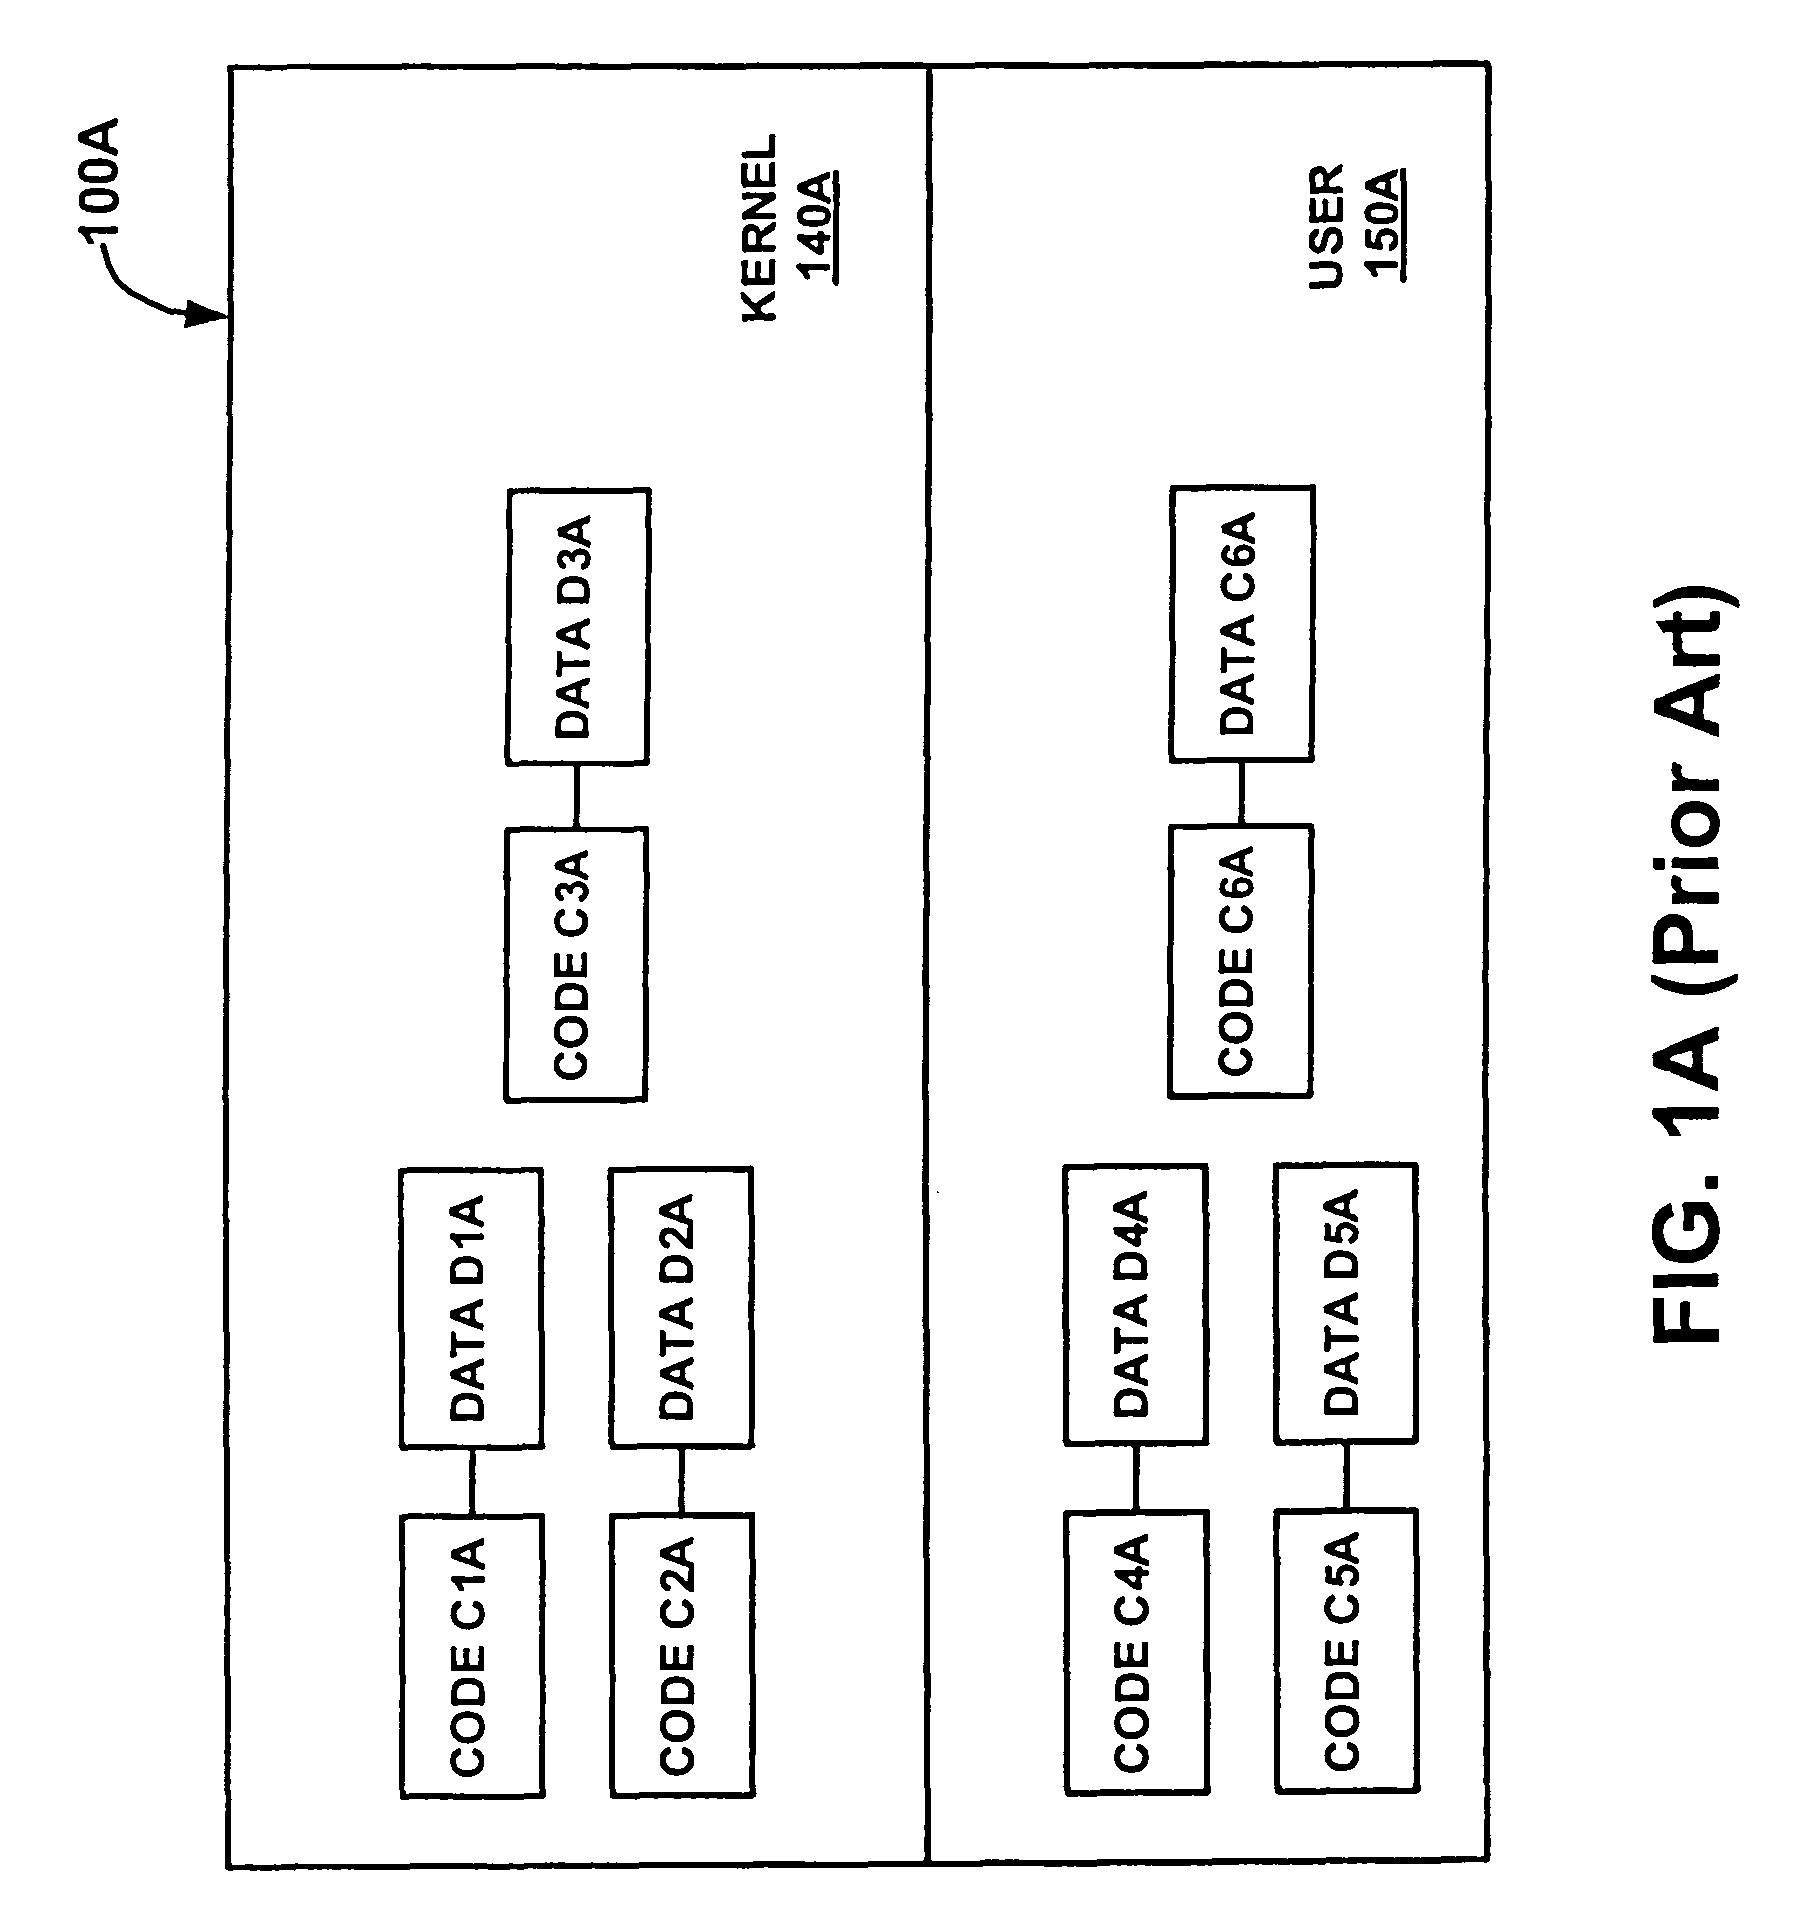 Providing a flexible protection model in a computer system by decoupling protection from computer privilege level